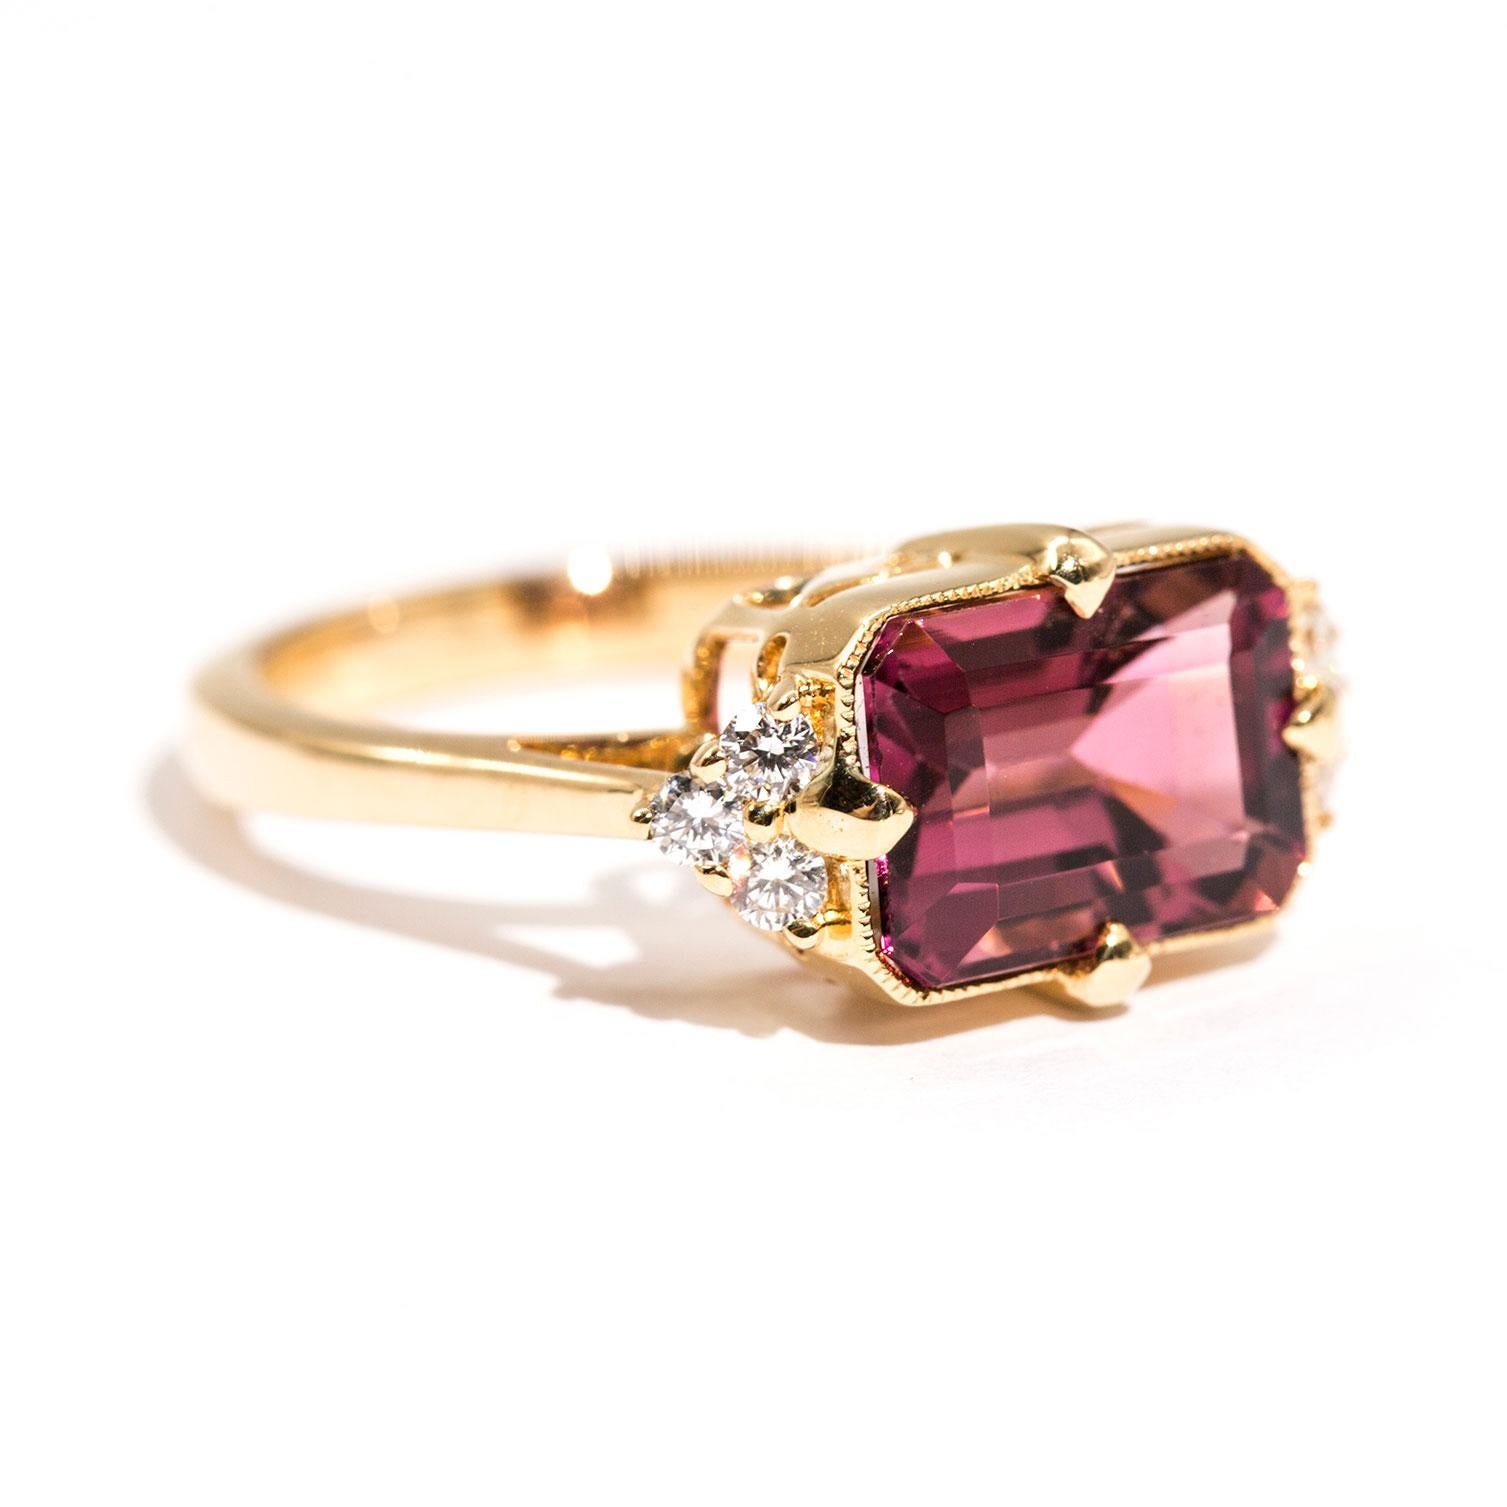 Forged in 18 carat yellow gold is this uniquely designed vintage inspired ring that features an alluring 3.80 carat bright reddish purple emerald cut tourmaline complimented by a total of 0.20 carats of sparkling round brilliant cut diamonds. We